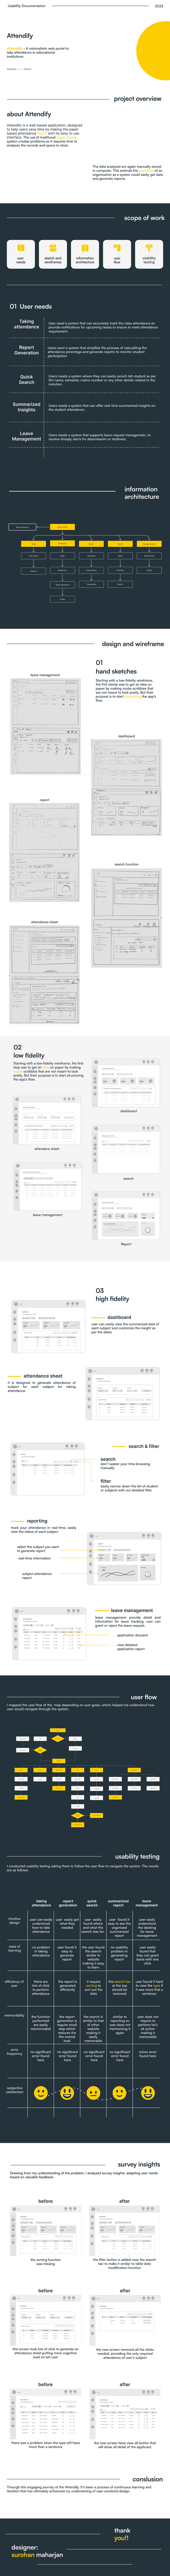 ui ux Figma Usability user interface Experience user experience research UI/UX ui design